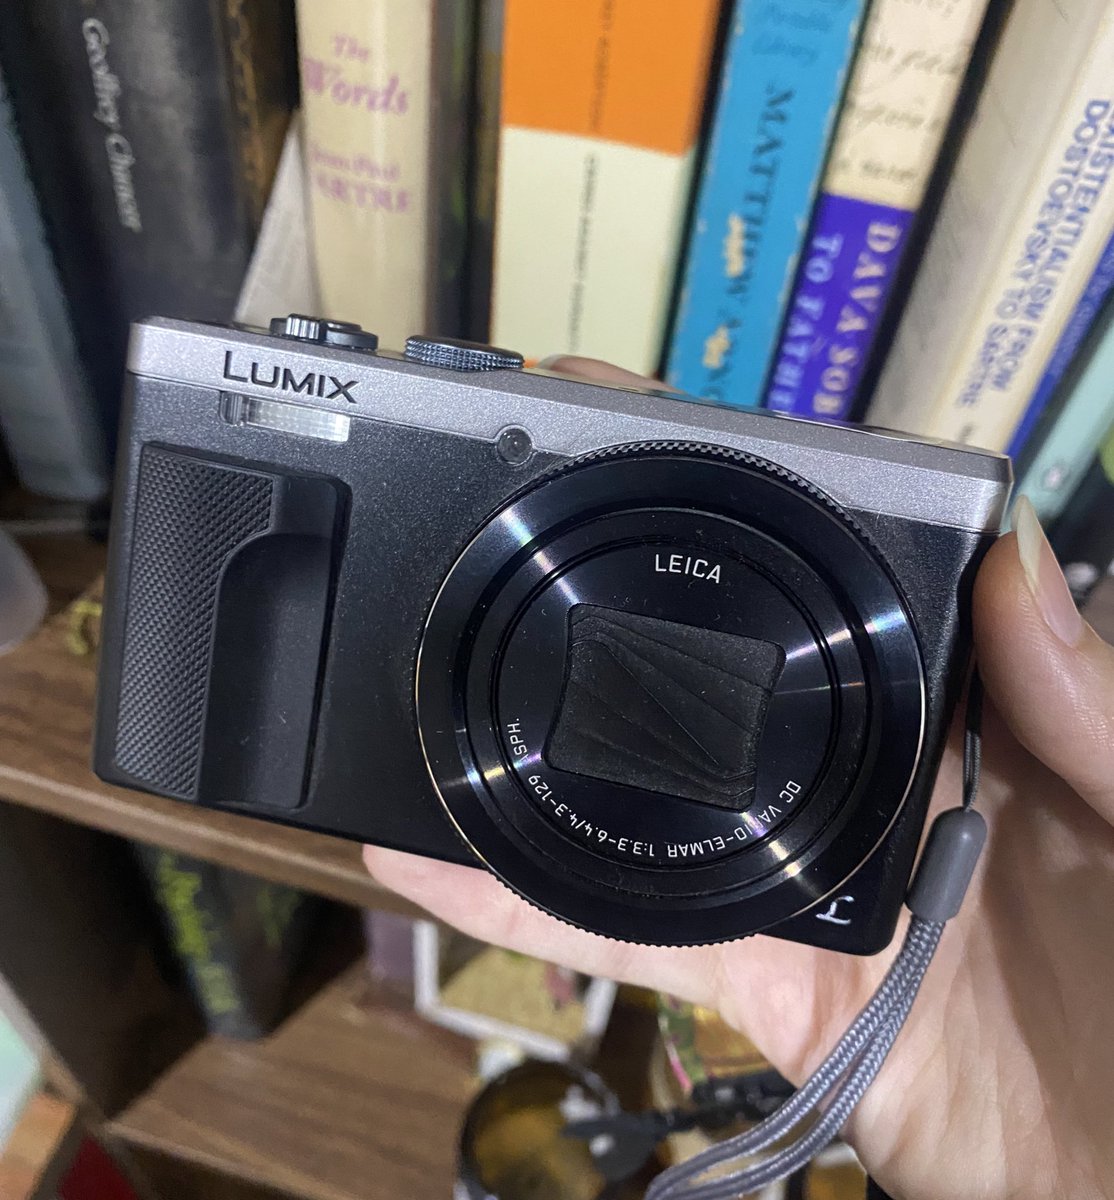 yallll just realised i have a lumix tz80 i’ve never used.
Has anyone here had experience with Lumix or the tz80? Surely it’s just good for travel clips etc..?
Got this in 2017 and it’s been packed away since 😭